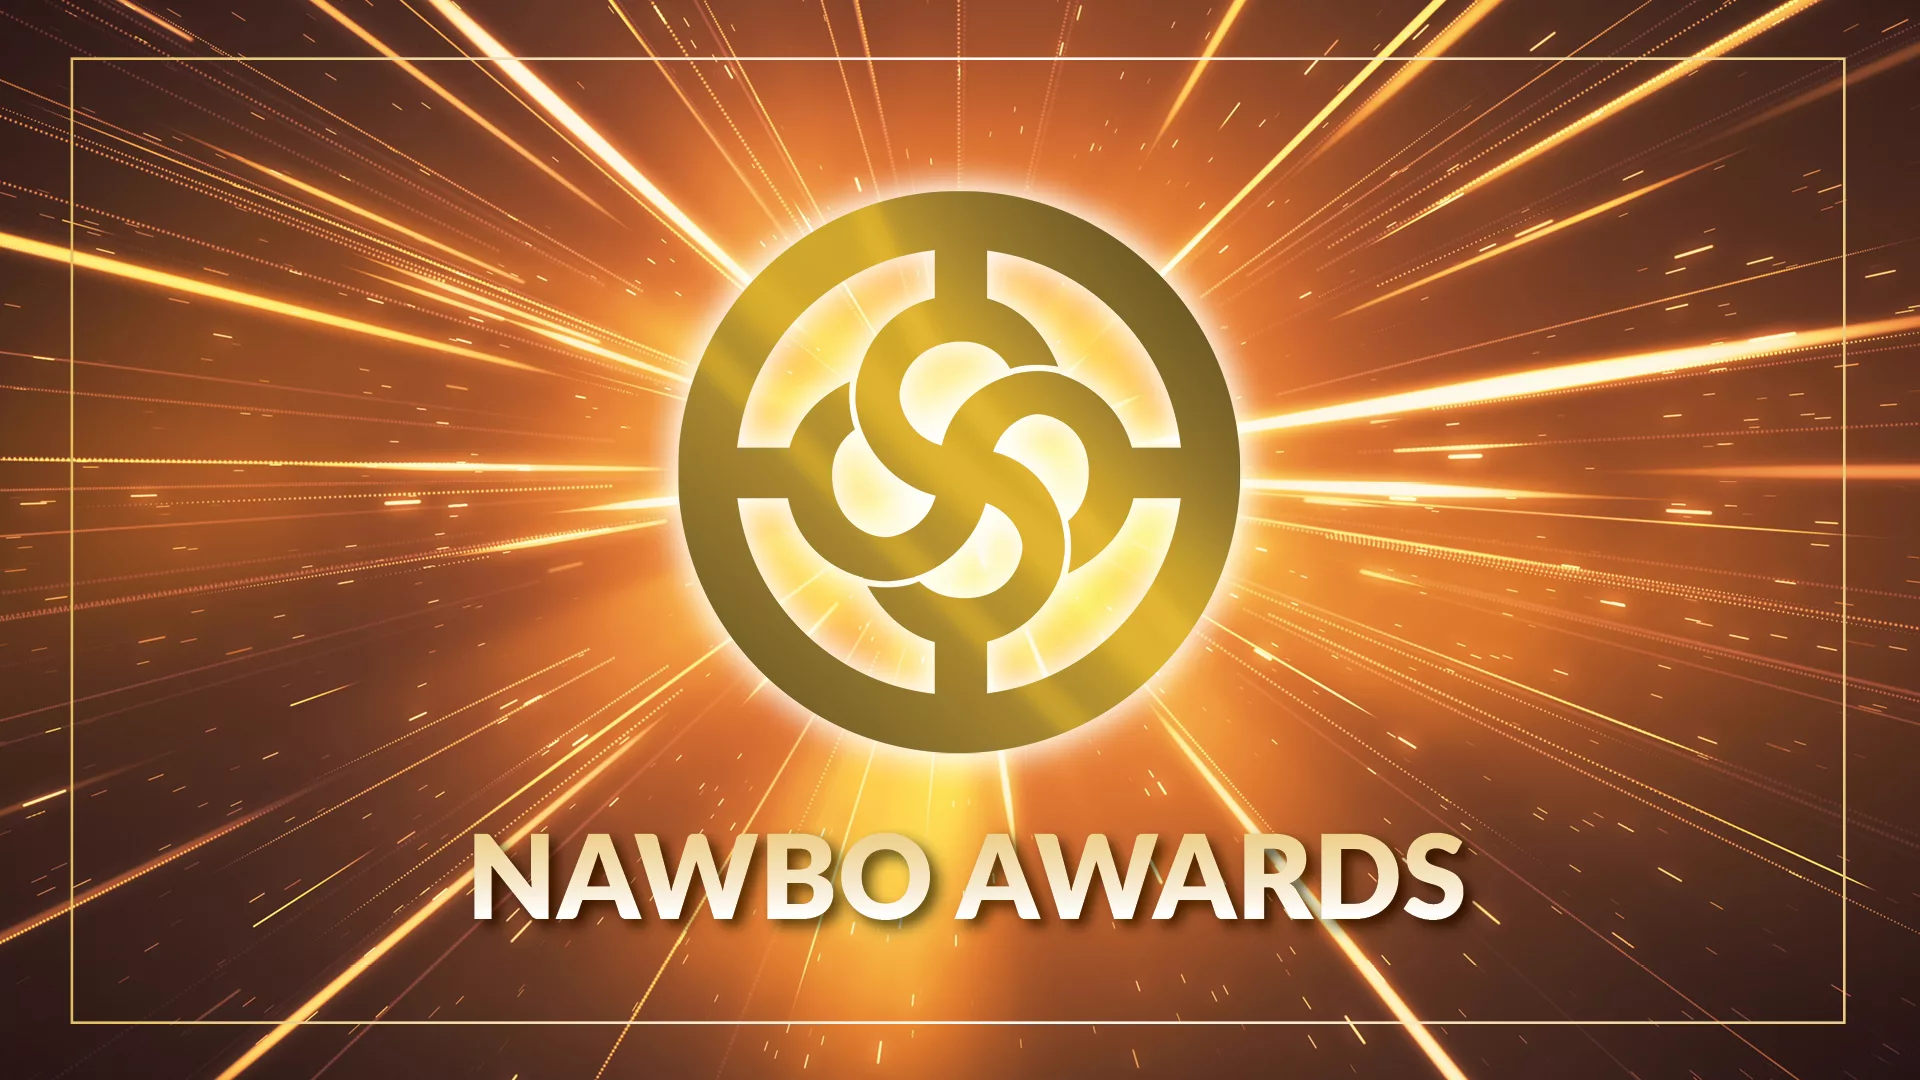 See What Our 2023 Awards Are All About—Then Nominate Yourself or Another Deserving WBO!